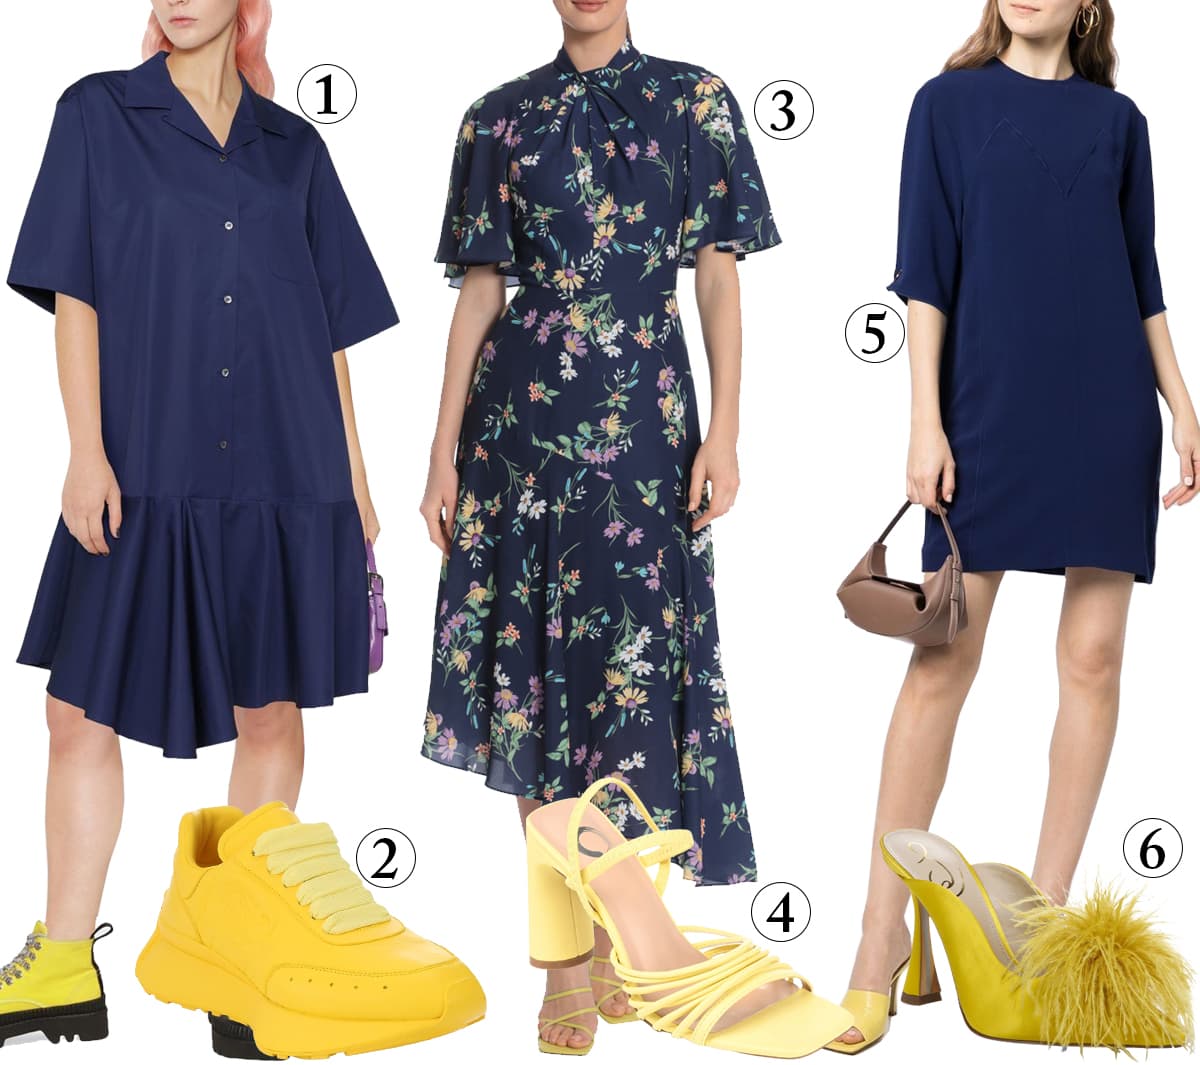 Outfits with sunshine yellow shoes and navy dresses